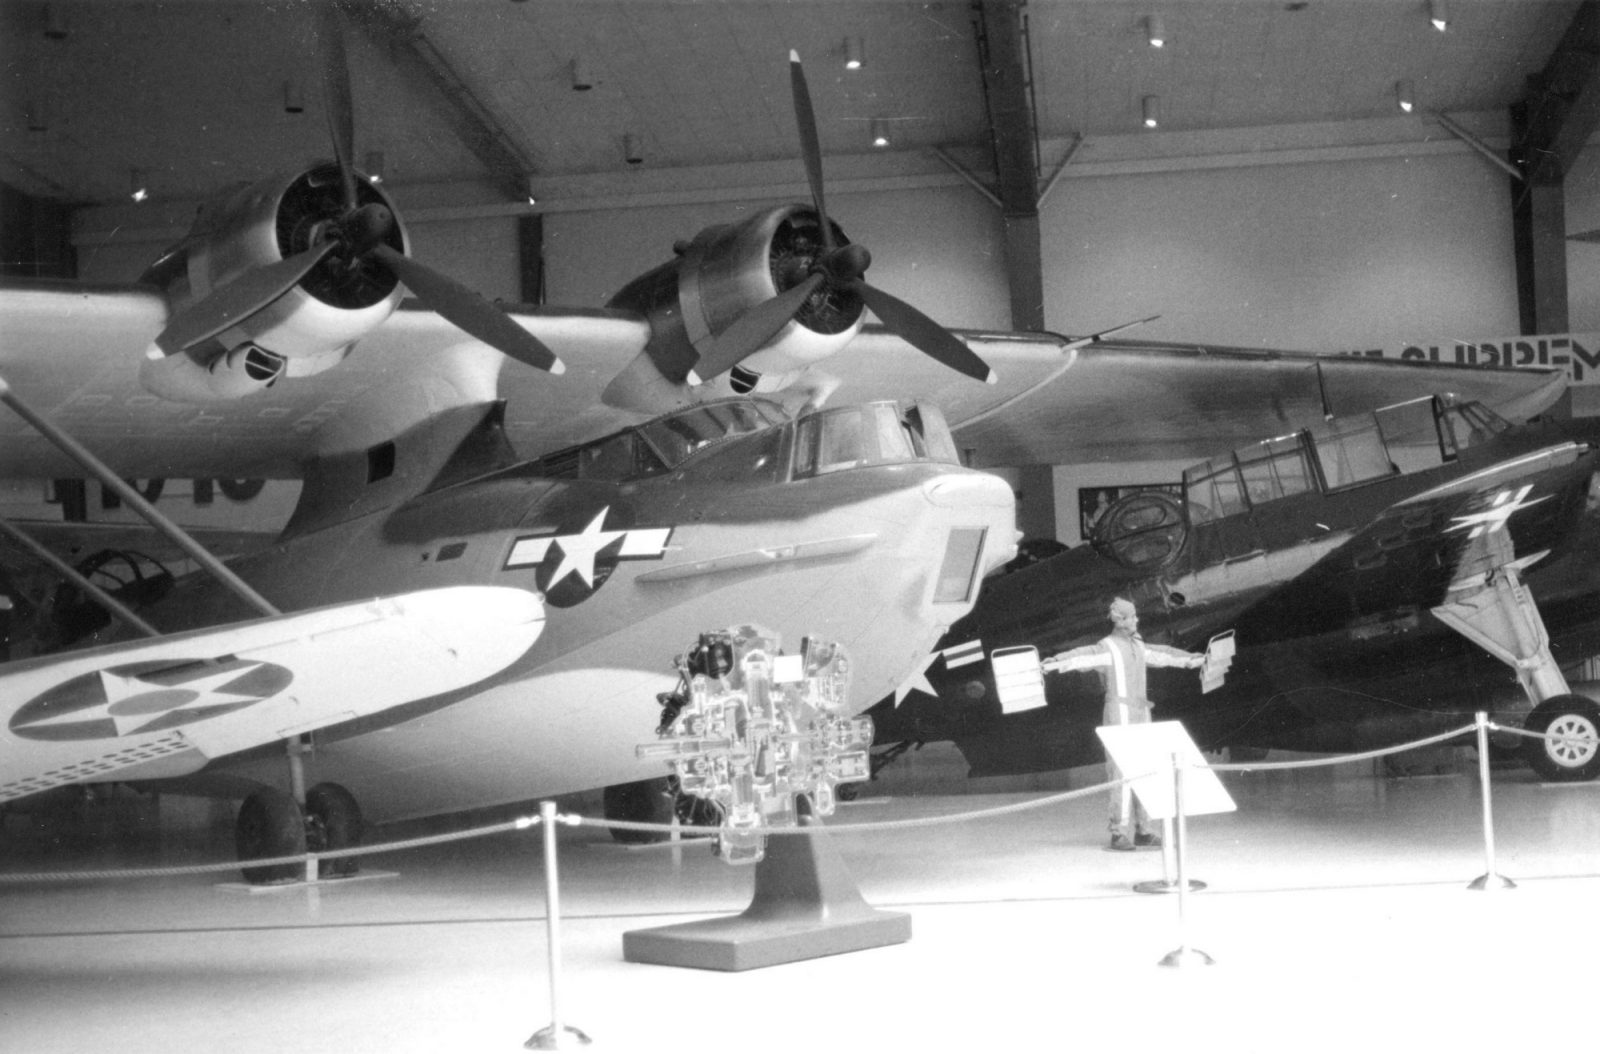 Consolidated PBY Catalina: Maritime Patrol Bomber of United States Navy